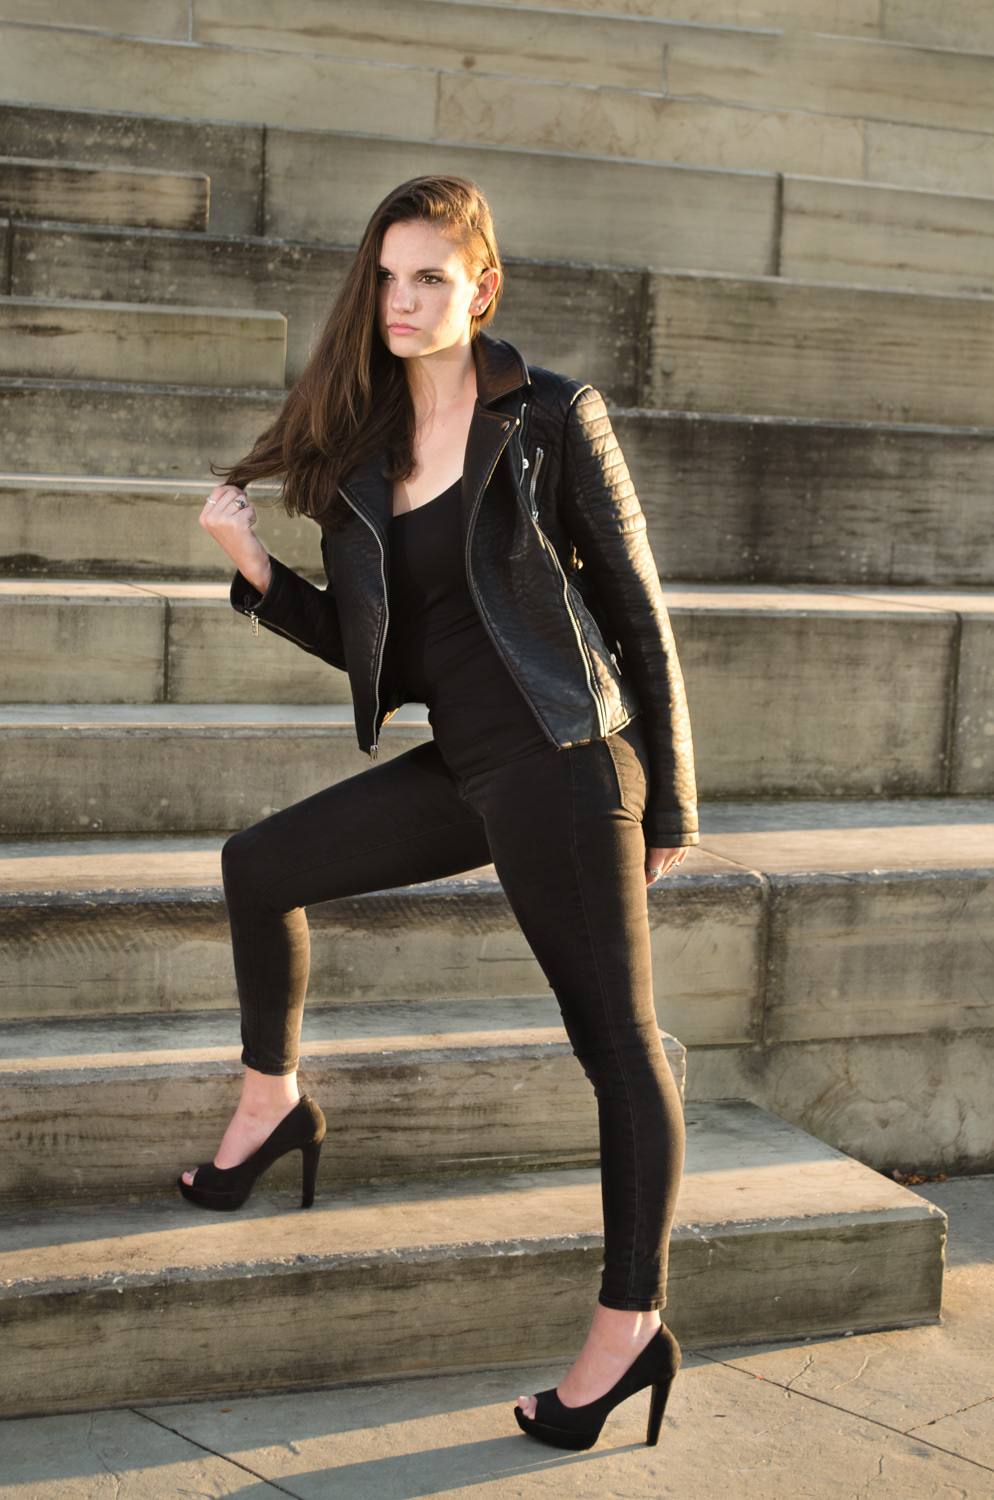 model black outfit heels lines stairs sunlight sun rays